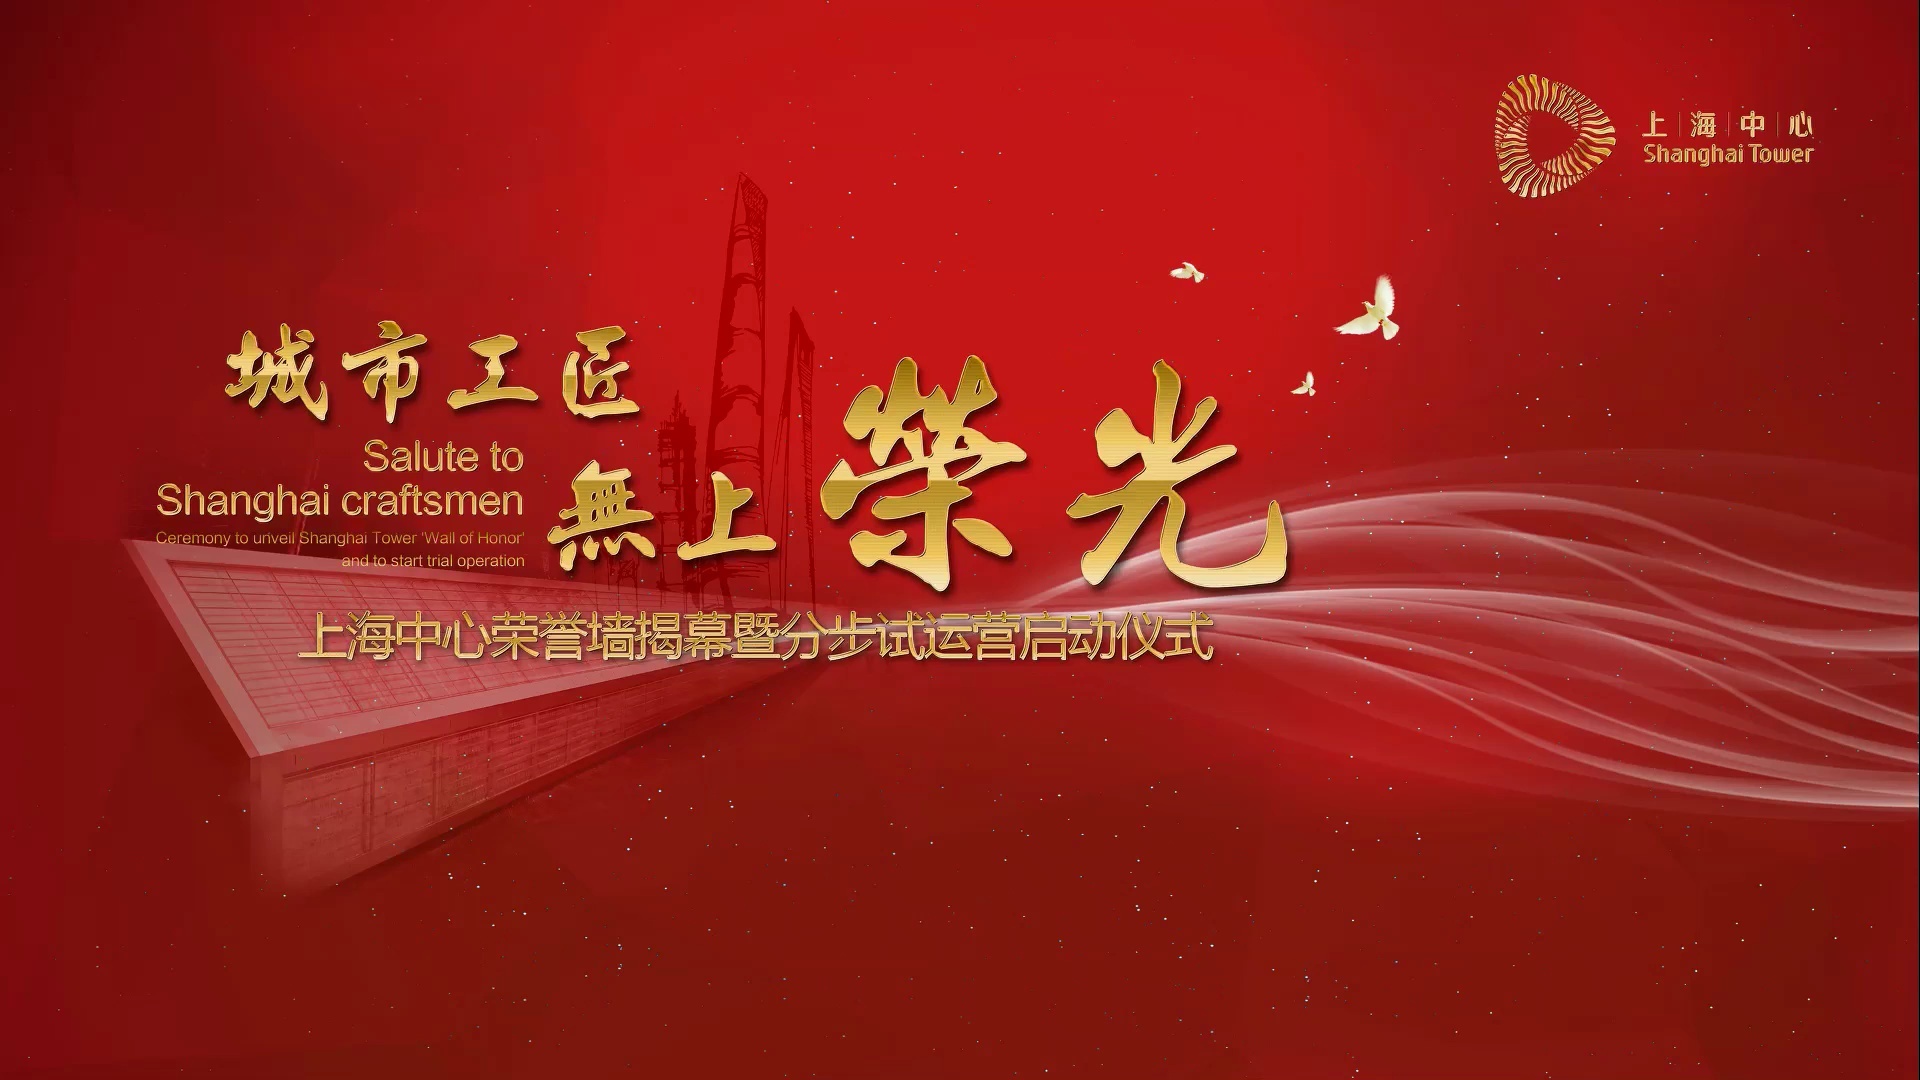 A documentary about the construction of Shanghai Tower